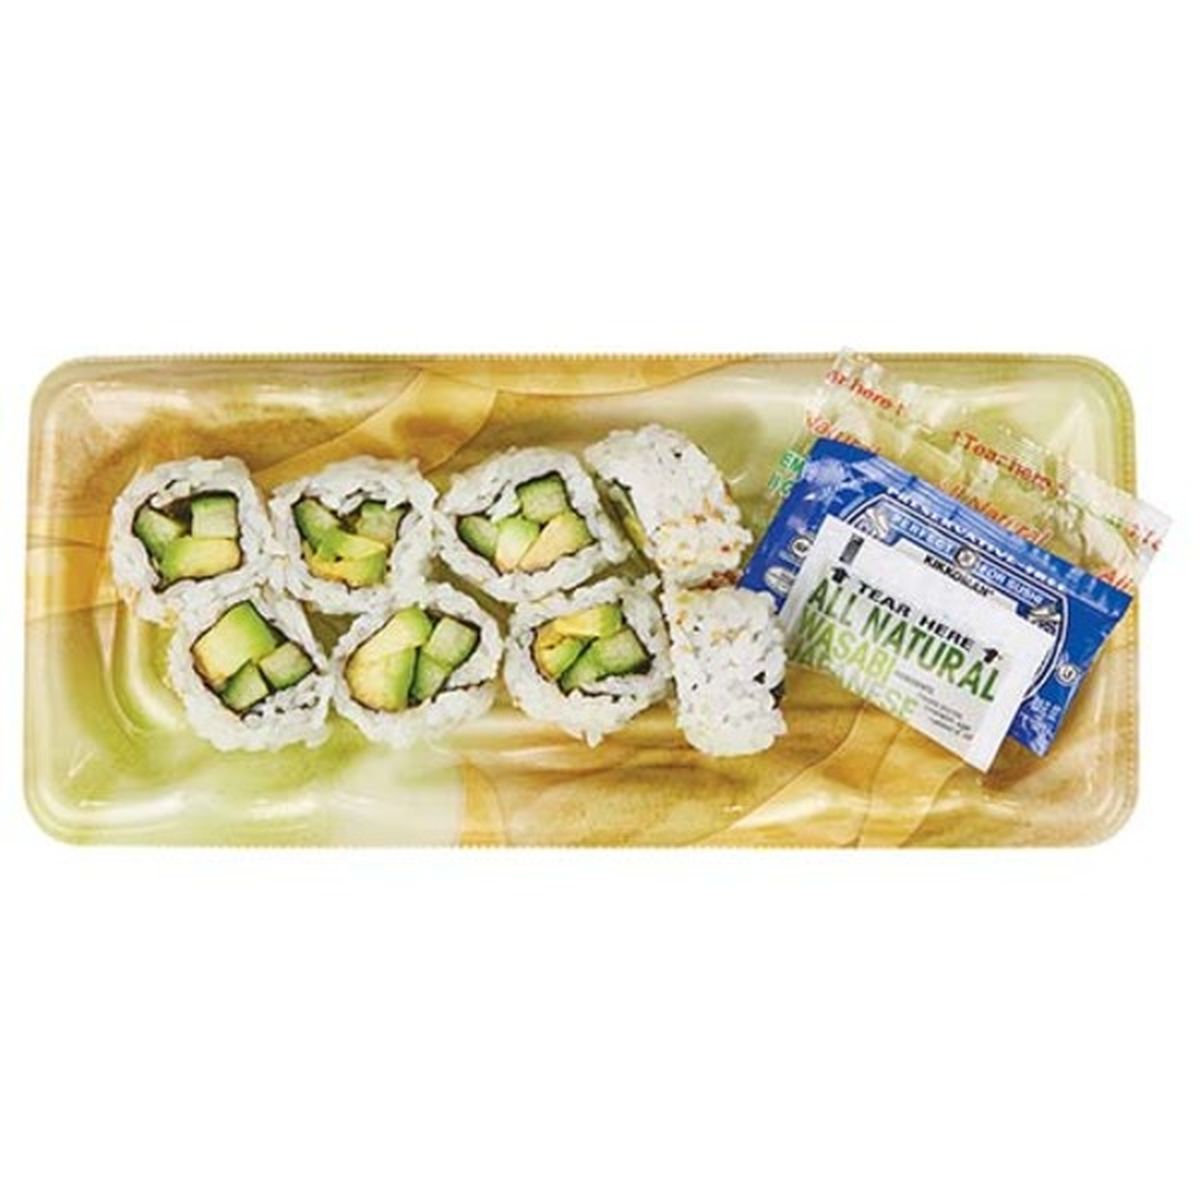 Calories in Wegmans Avocado Cucumber Roll with White Rice (Vegetable)